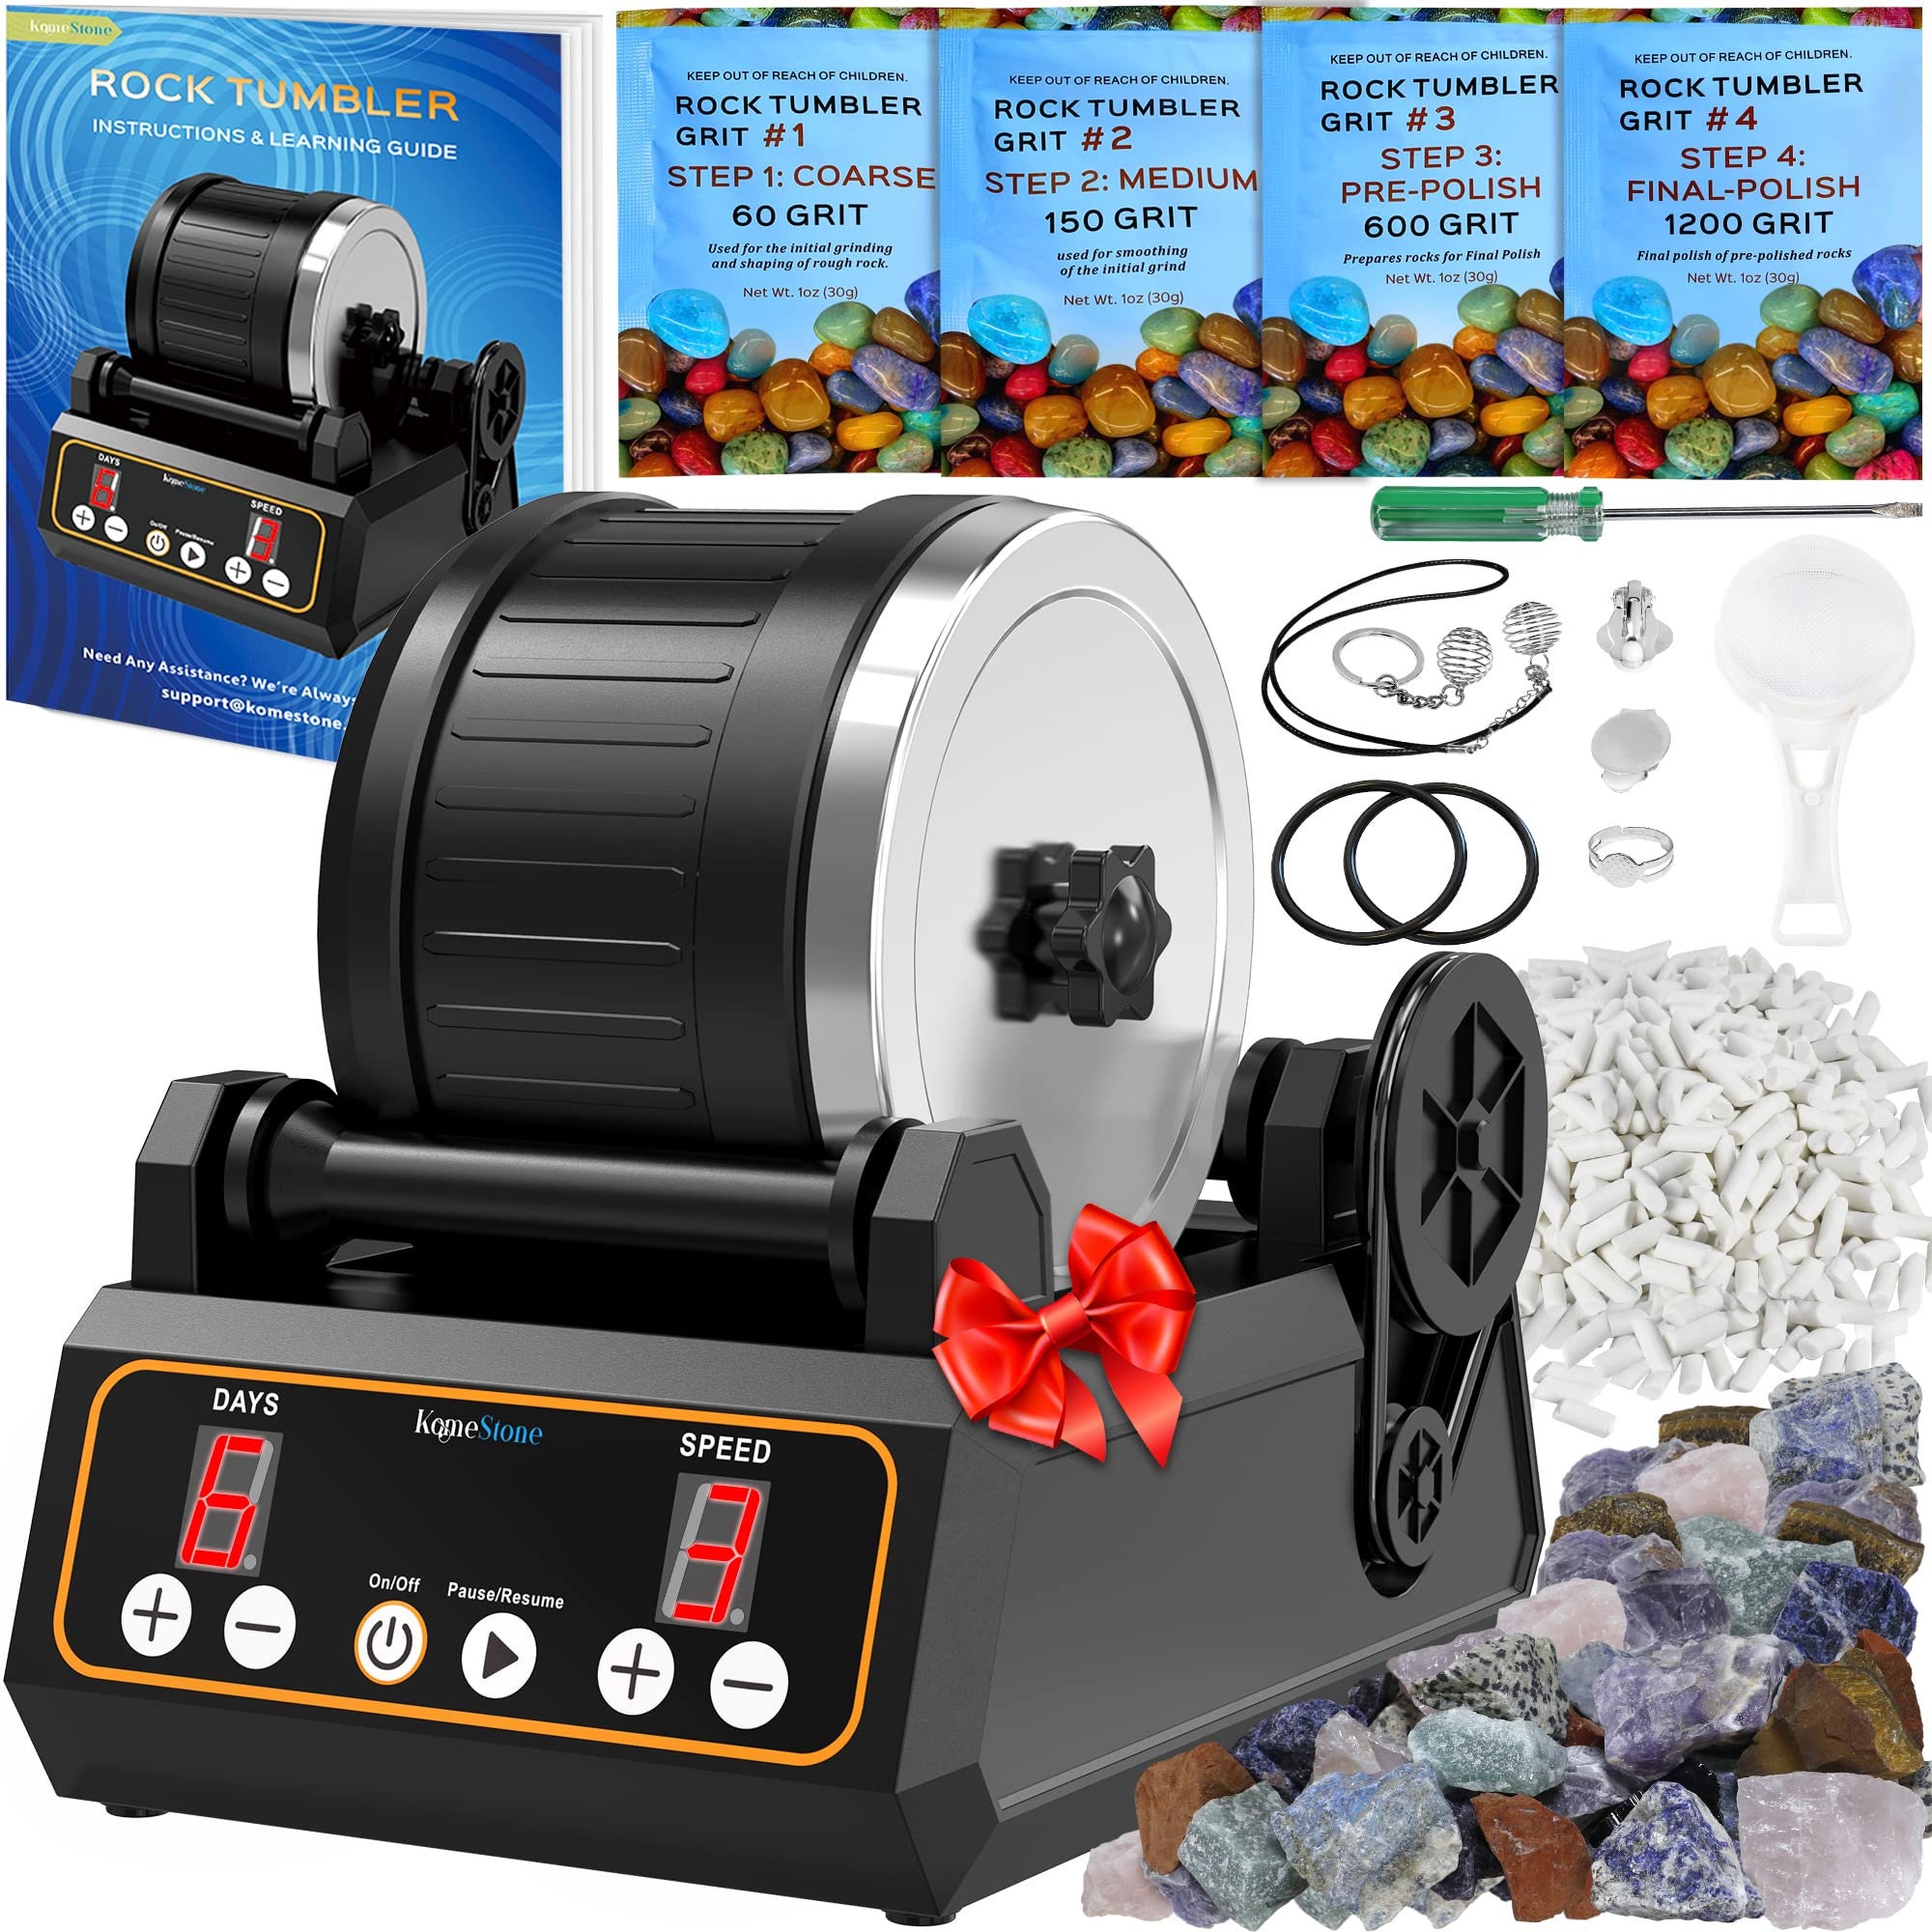 KomeStone Rock Tumbler Grits Kit, 8 Bags, Compatible with Any Rocks and  Rock Tumblers